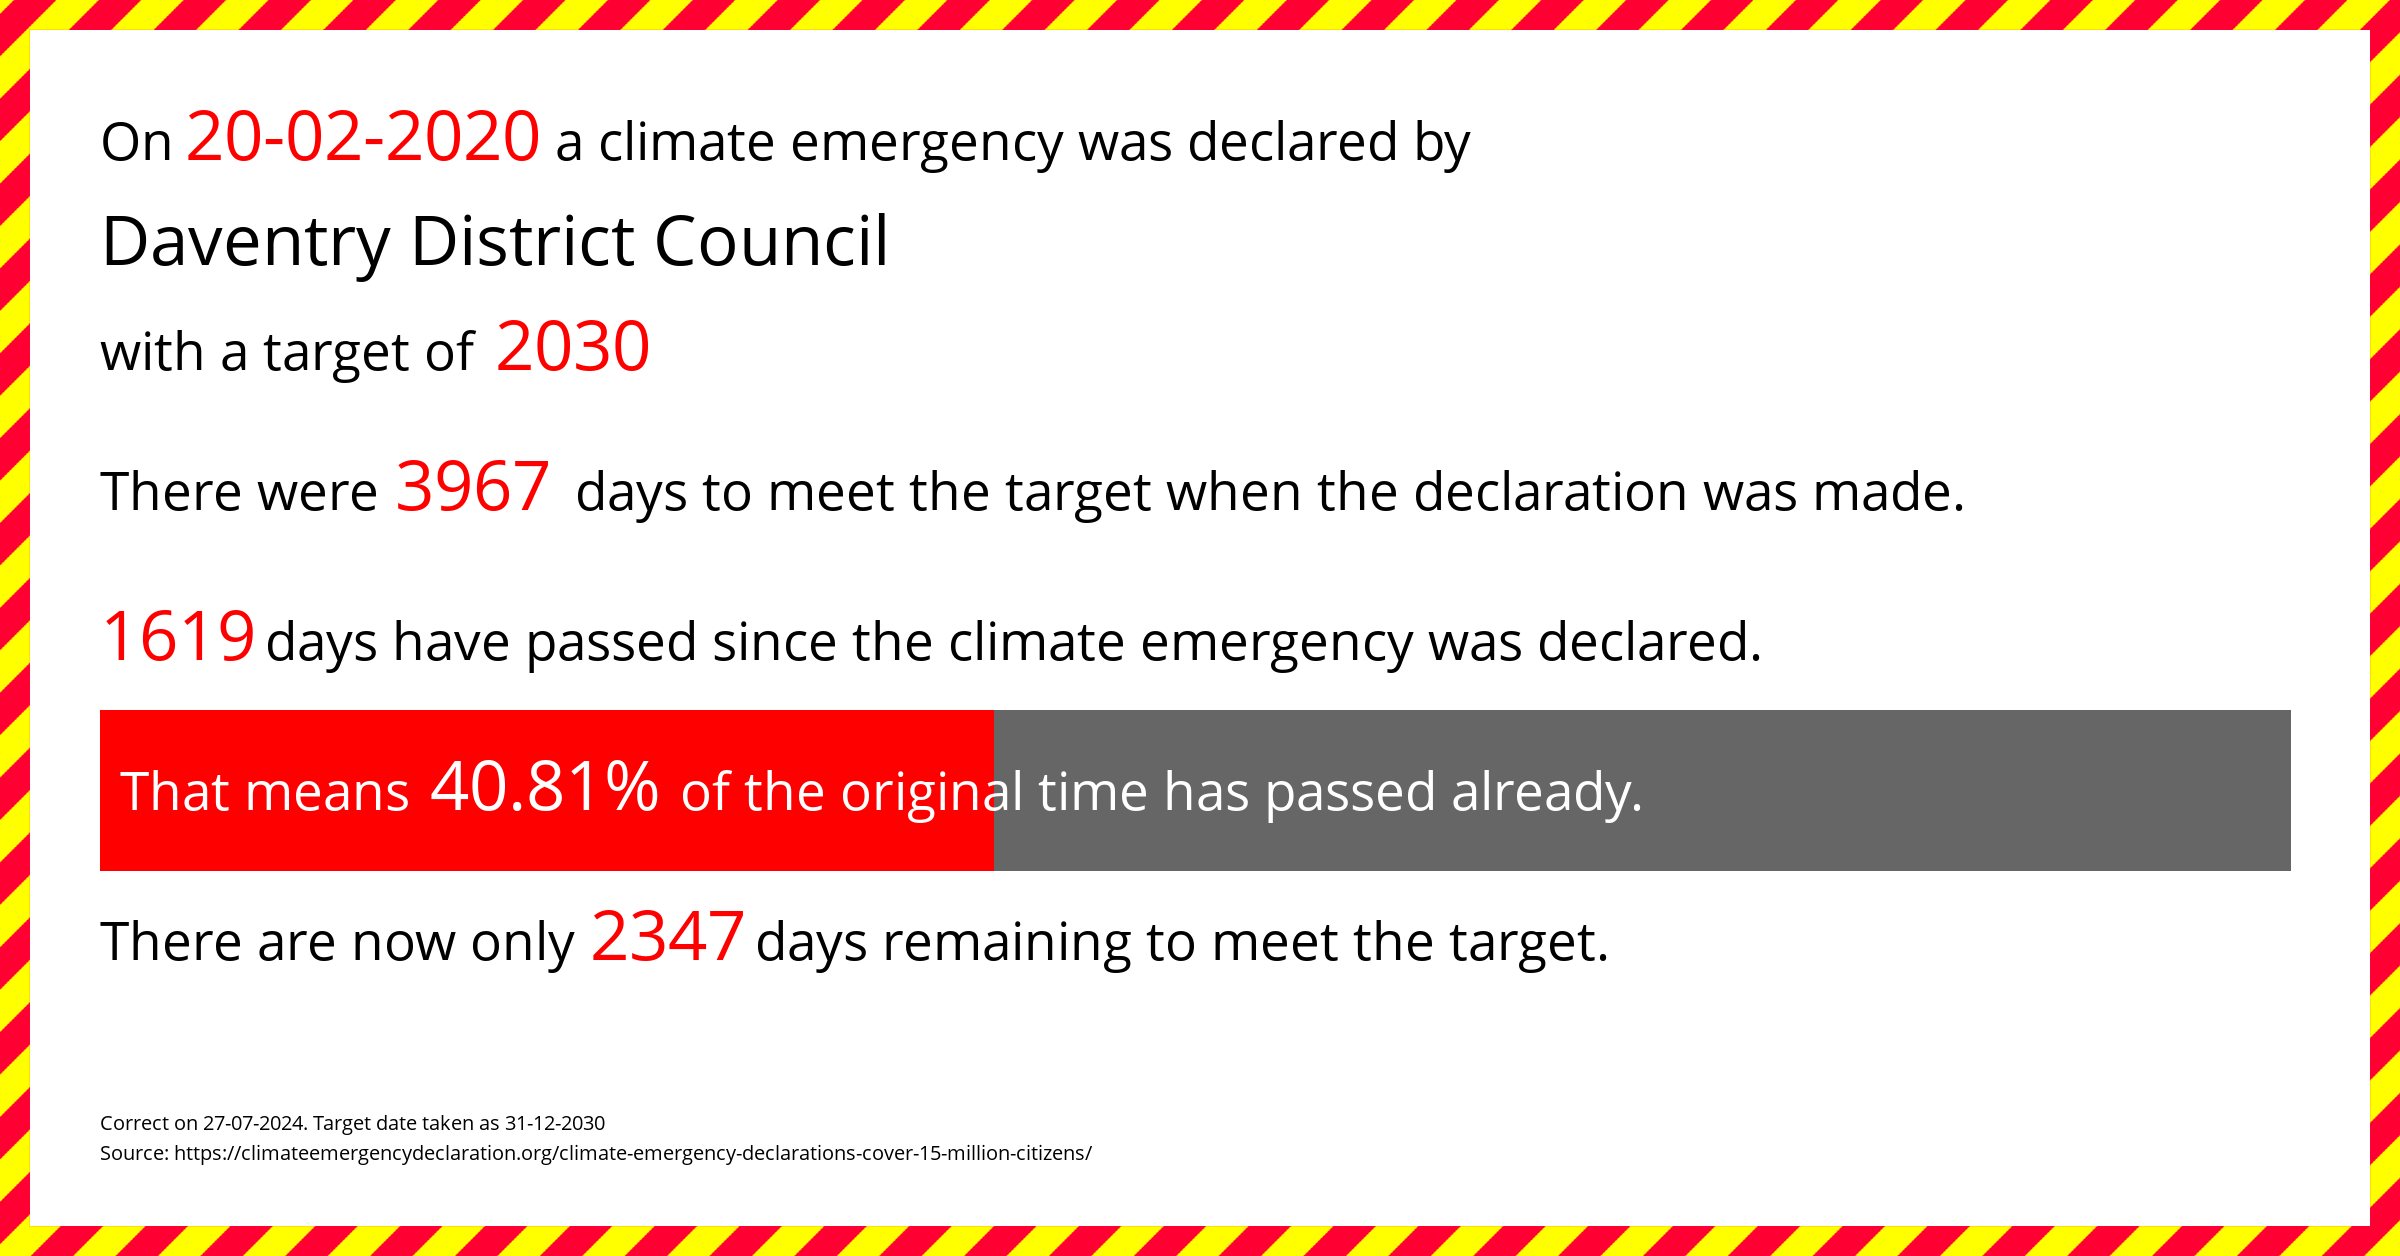 Daventry District Council  declared a Climate emergency on Thursday 20th February 2020, with a target of 2030.